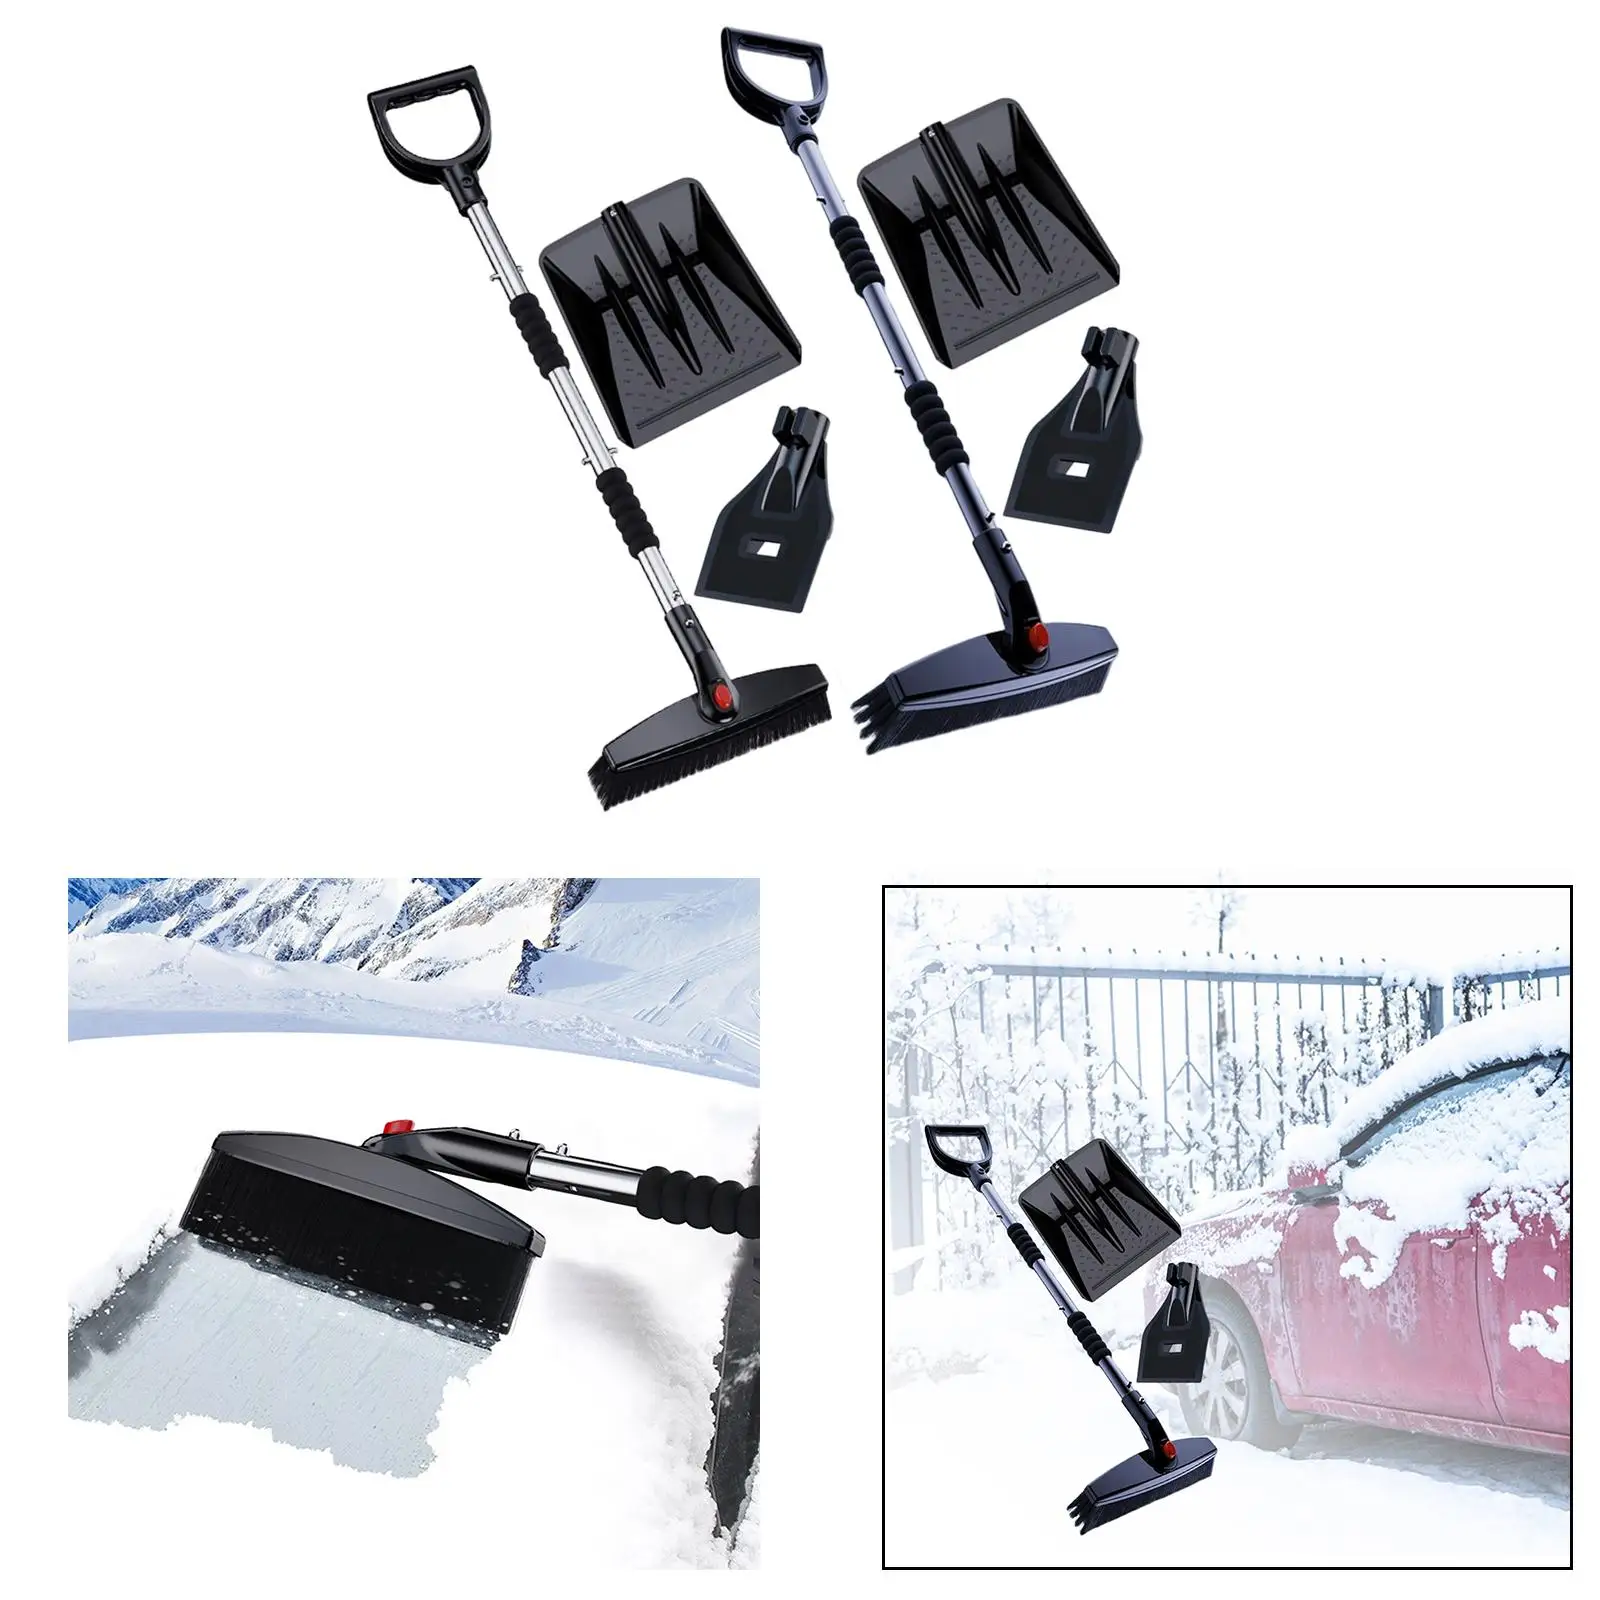 Portable Snow Removal Tool car Window Snow Cleaner Stainless Steel Handle 360° Rotatable Head for Truck Car Vehicles Auto